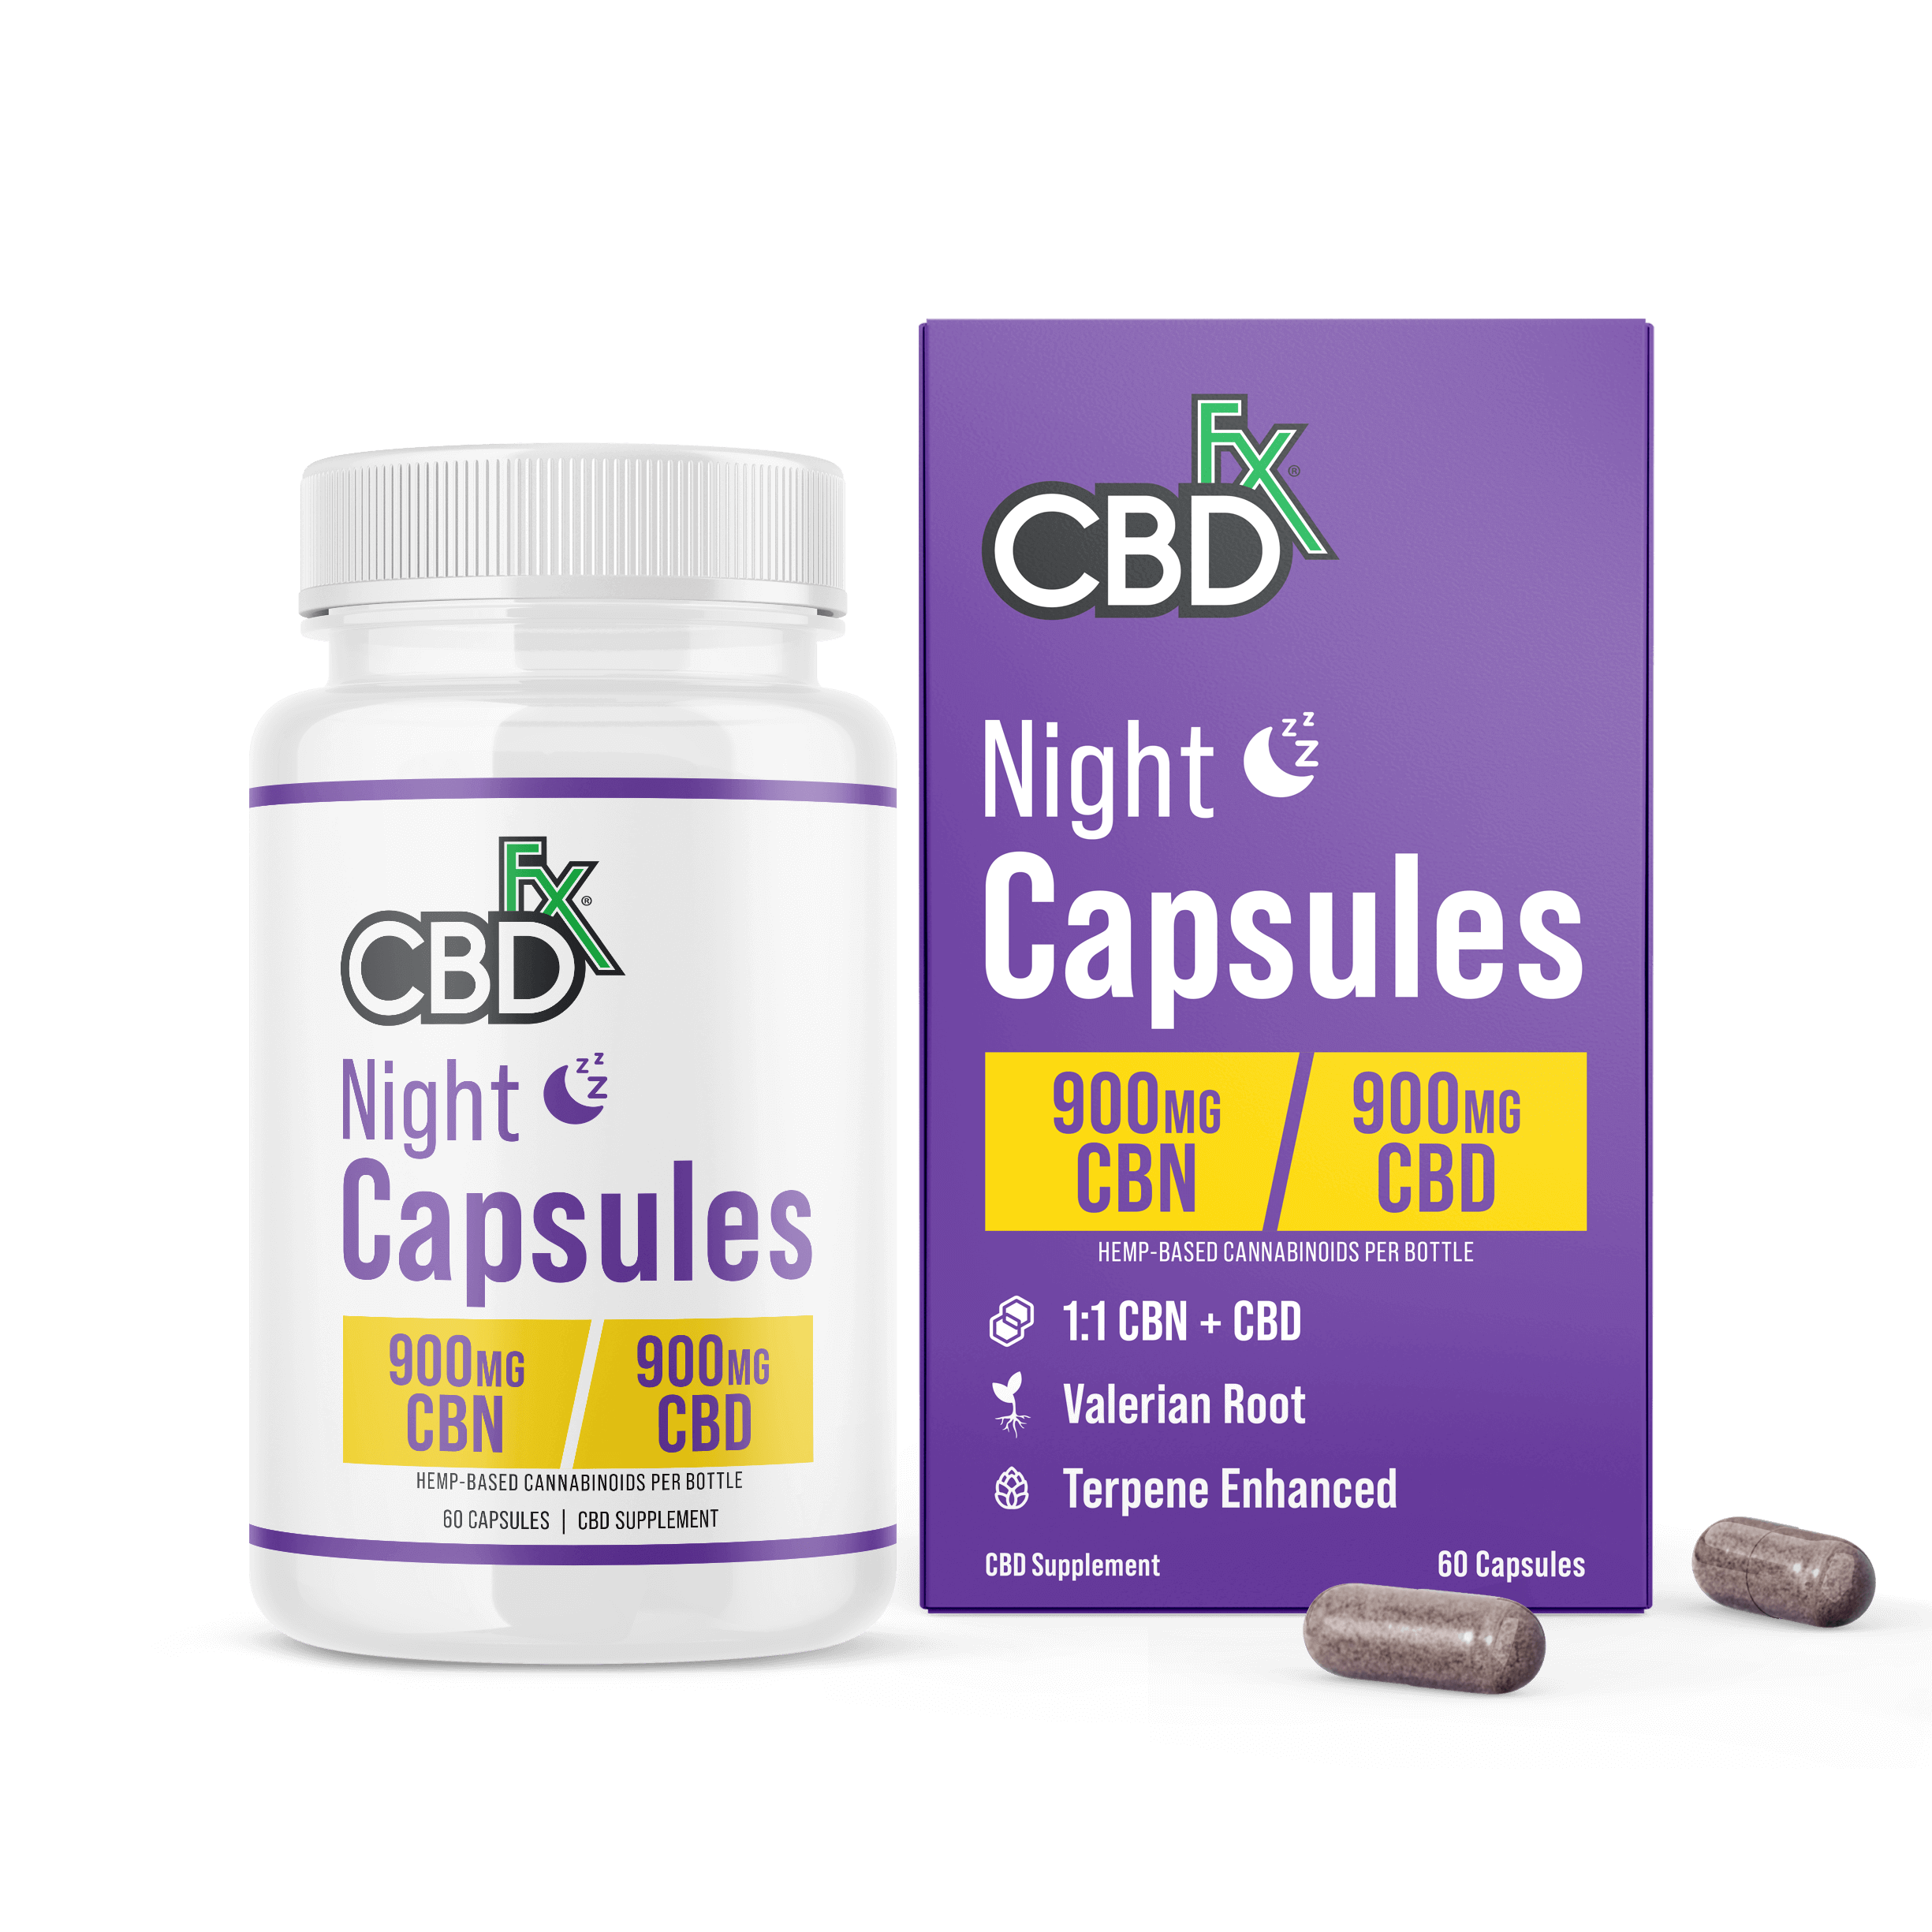 Get Your “CBN” Products - capsules night